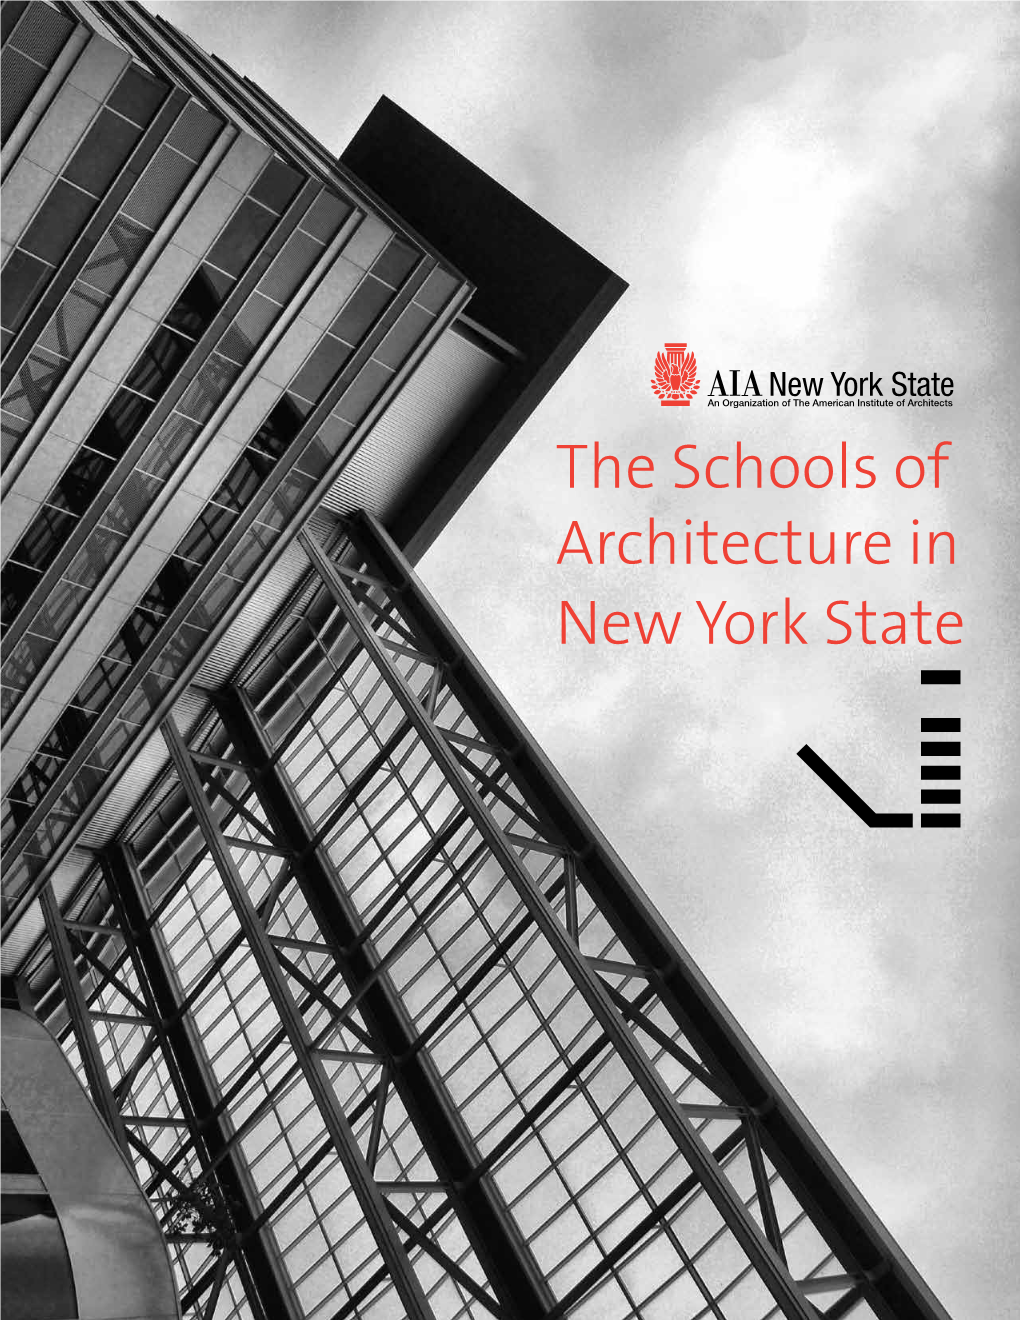 The Schools of Architecture in New York State